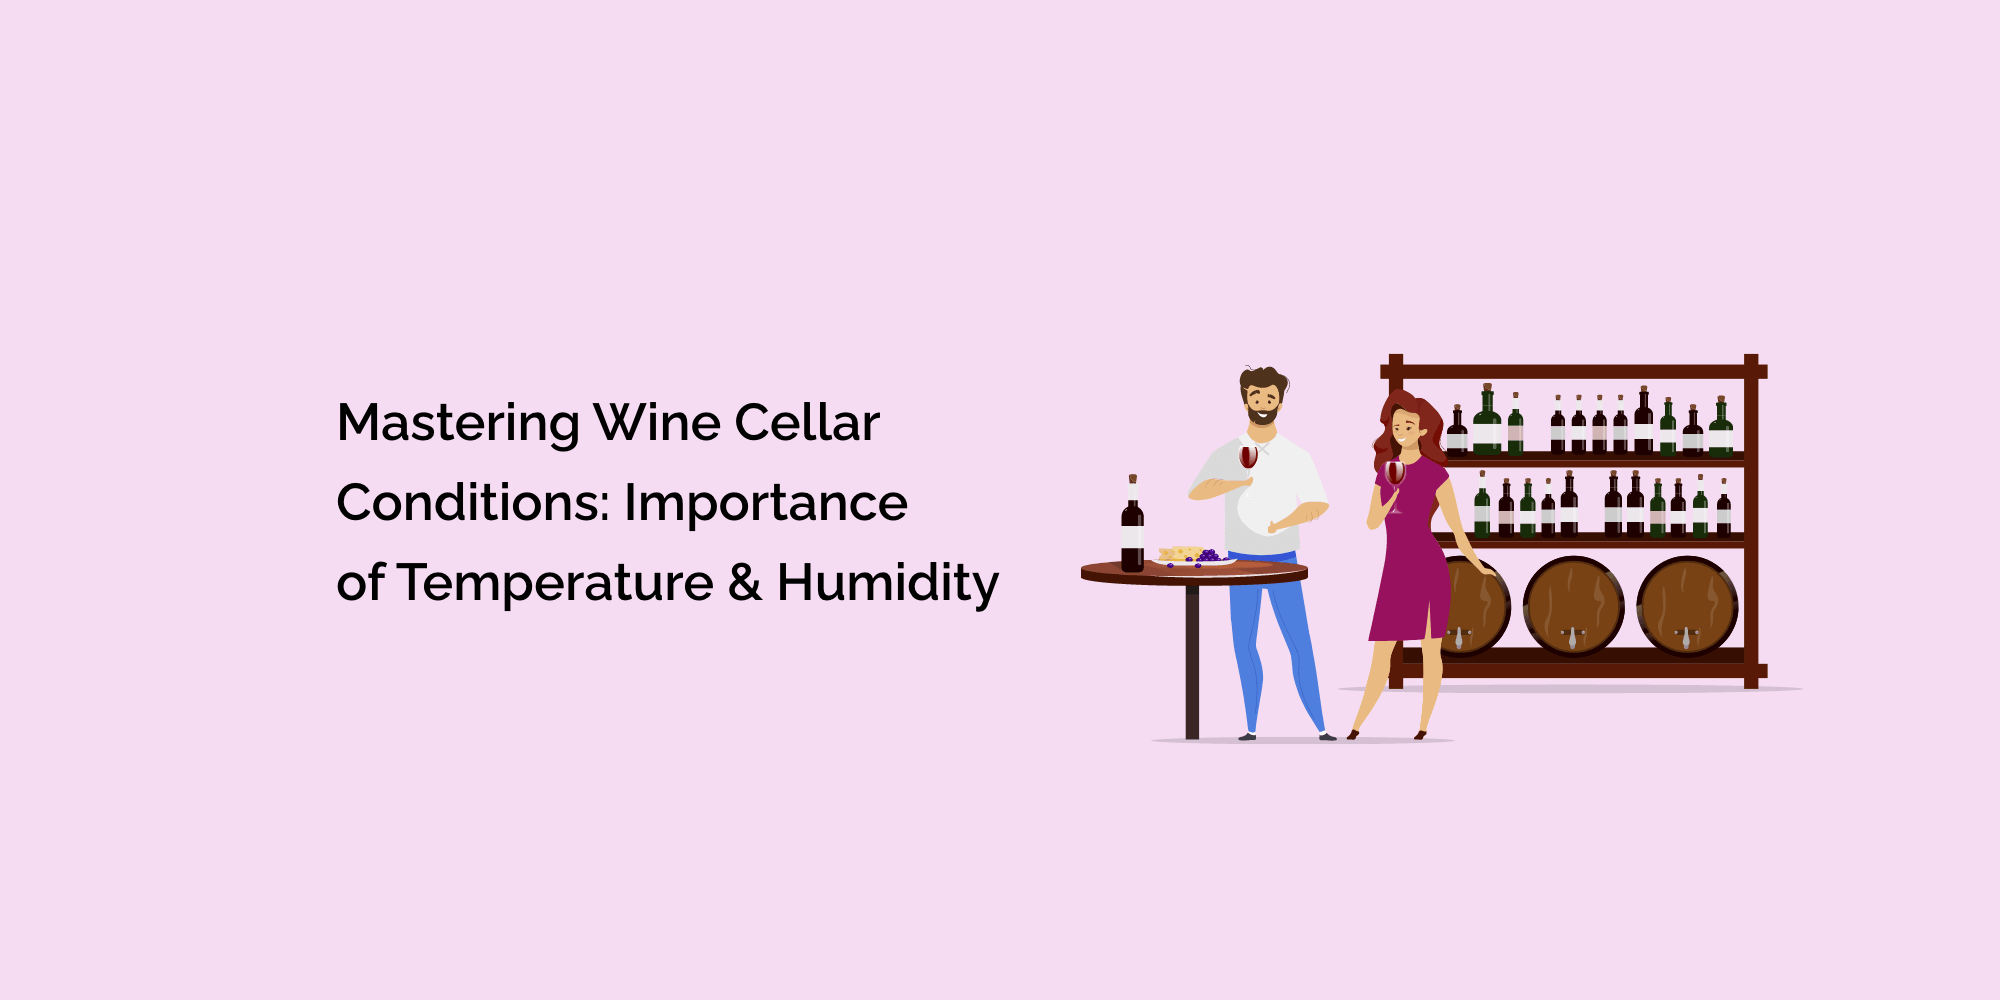 Mastering Wine Cellar Conditions: Importance of Temperature and Humidity